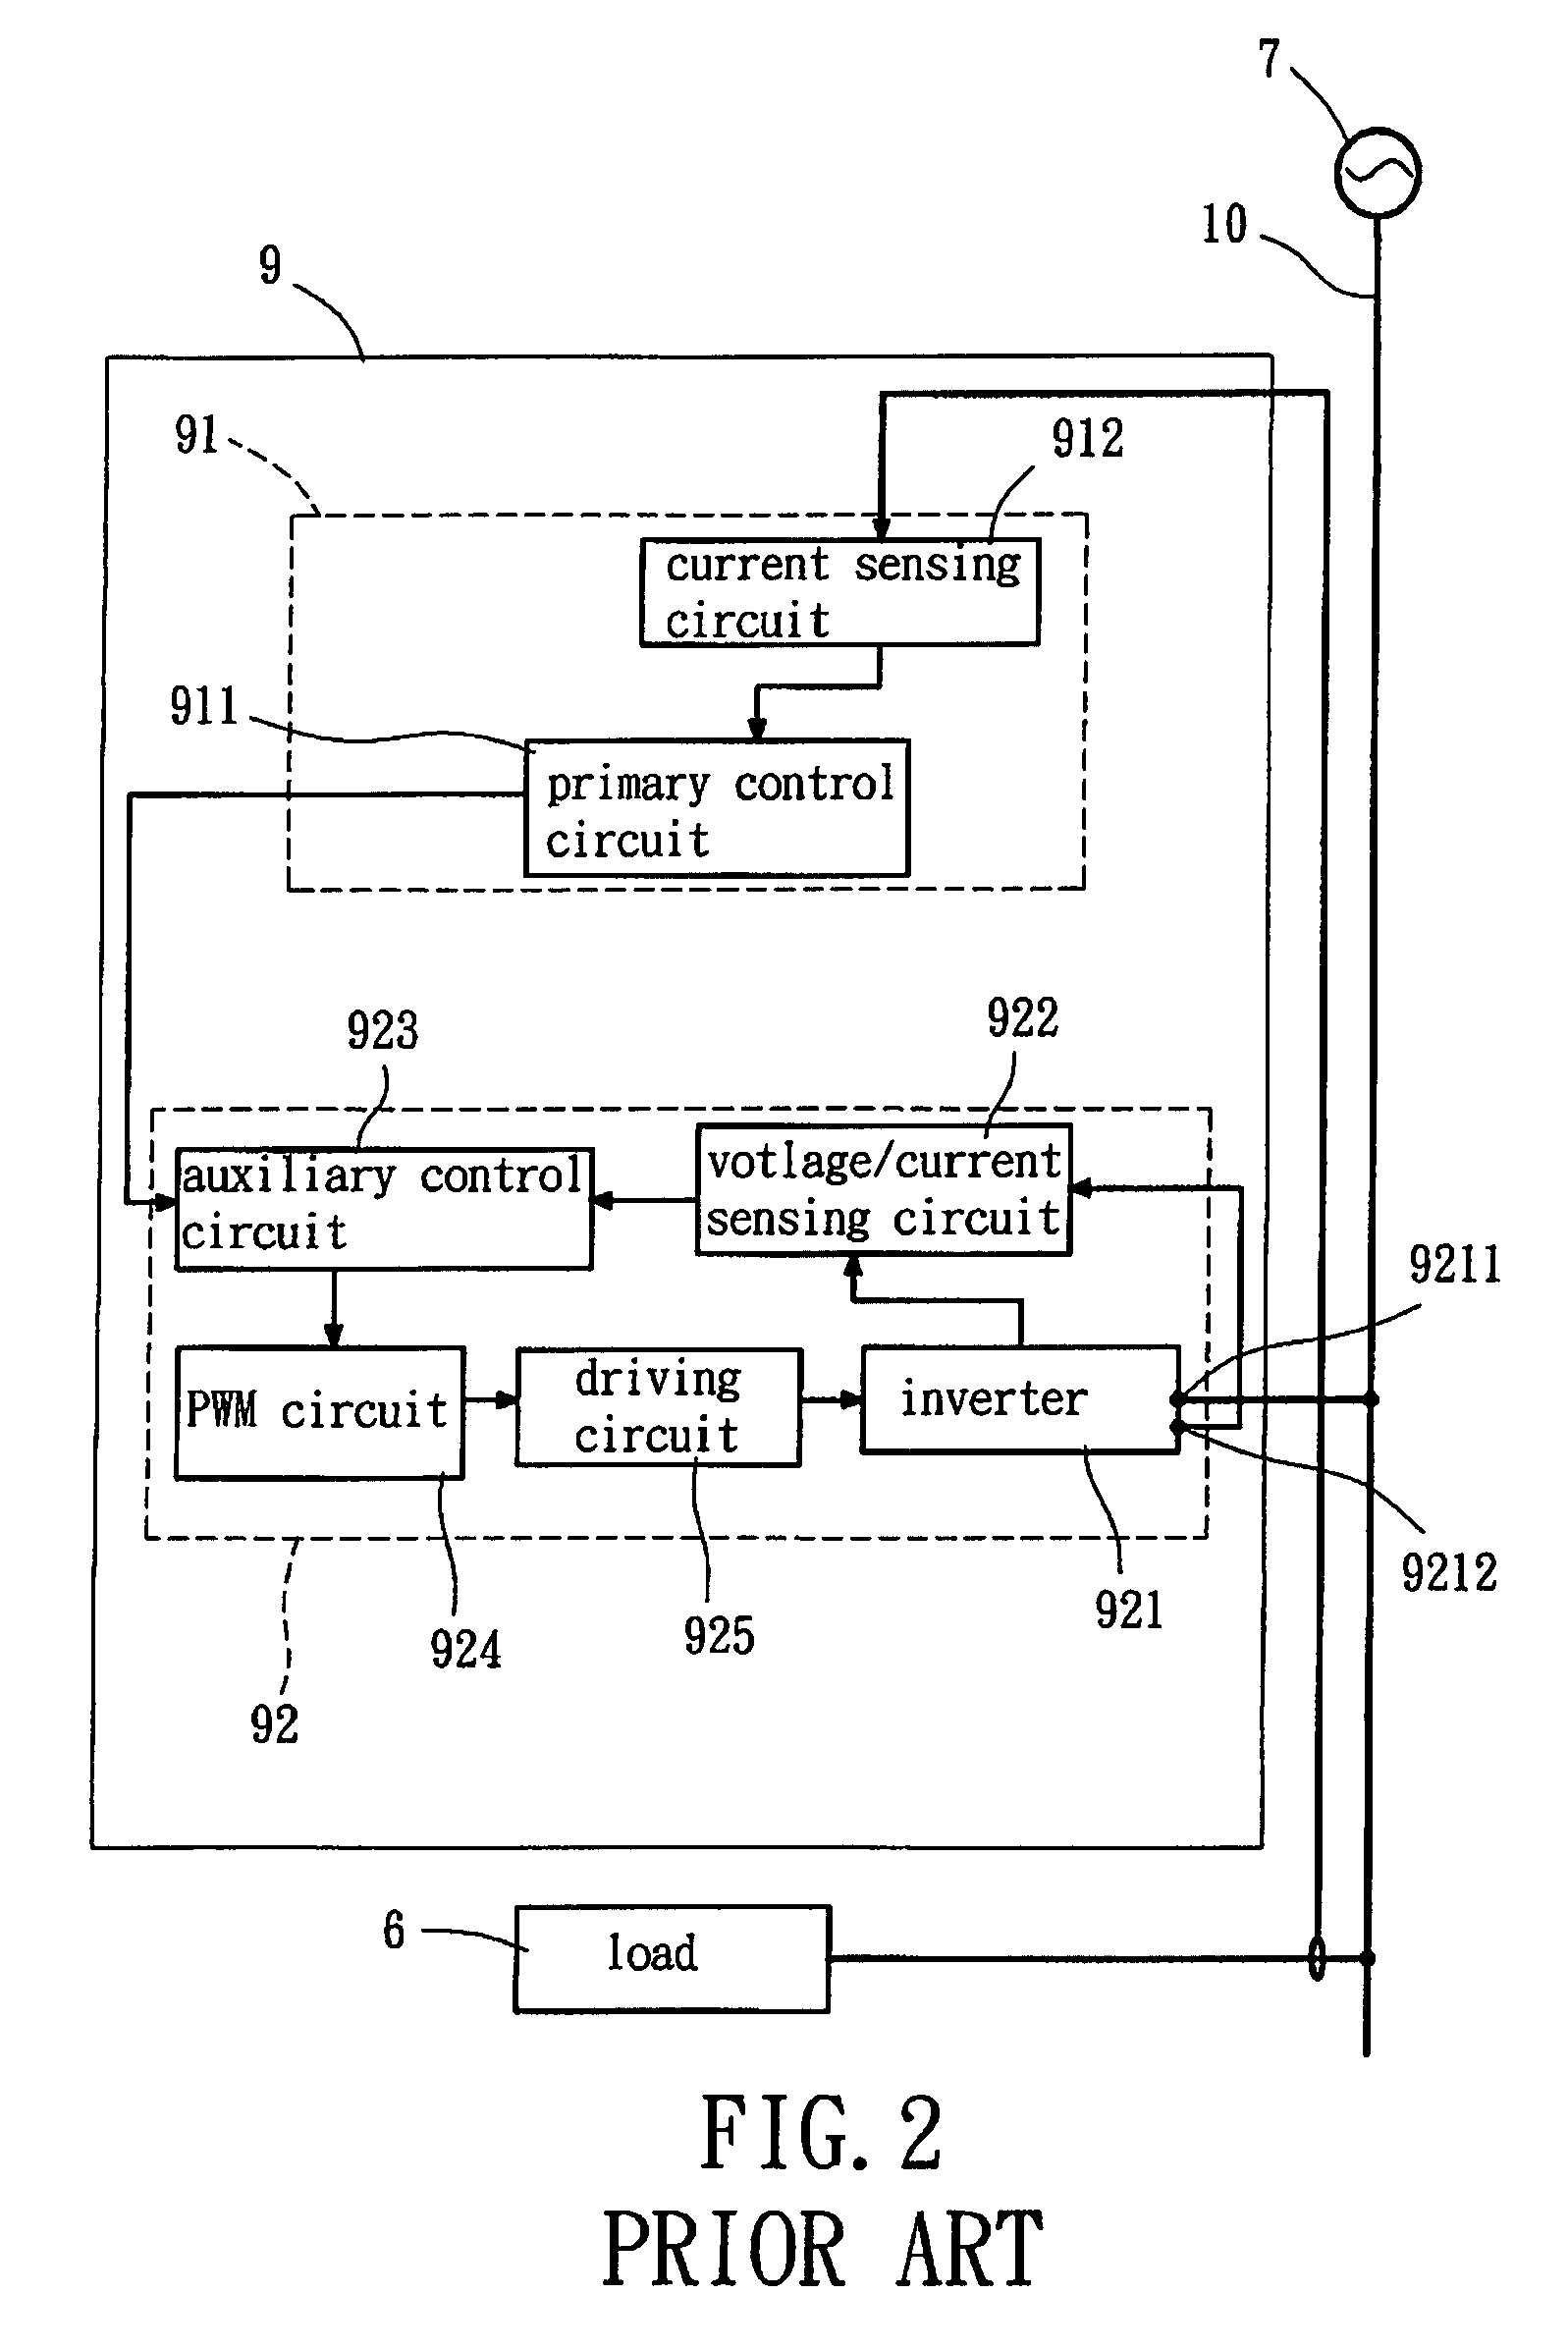 Modularized active power filter